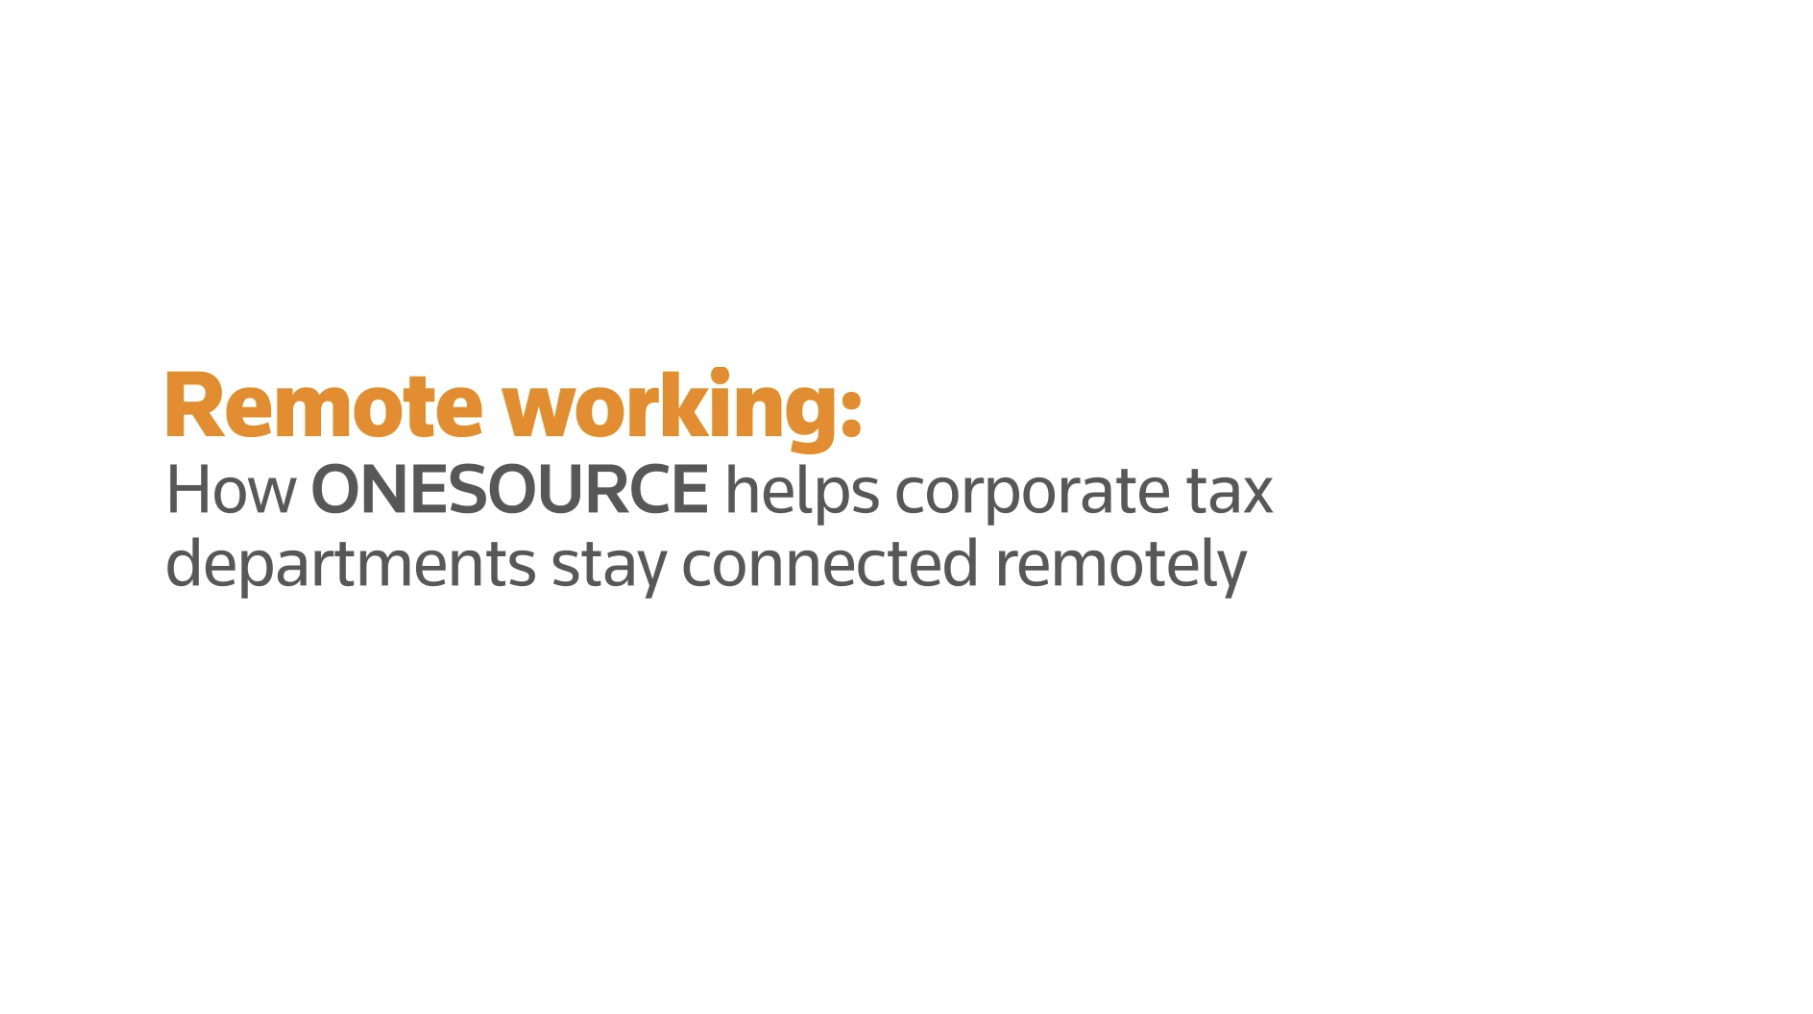 How ONESOURCE helps corporate tax departments work remotely